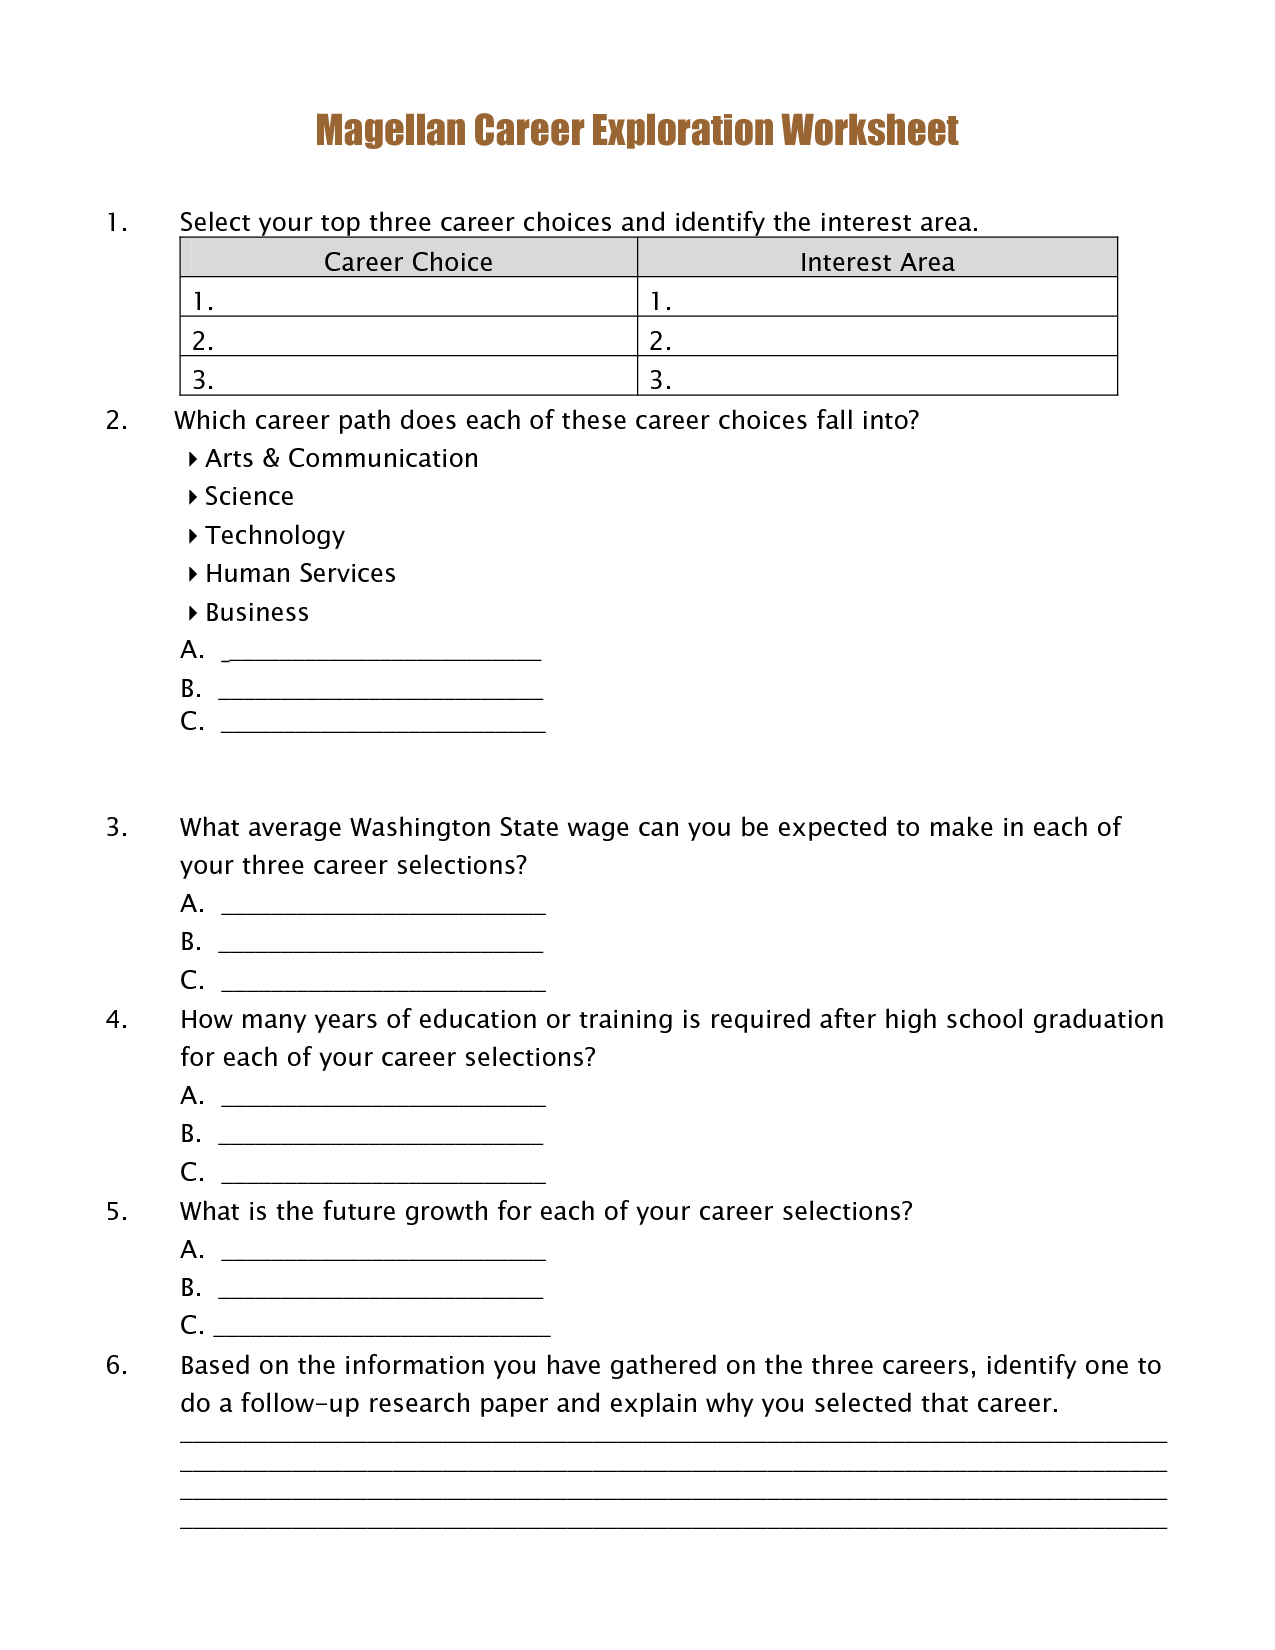 research worksheets for middle school